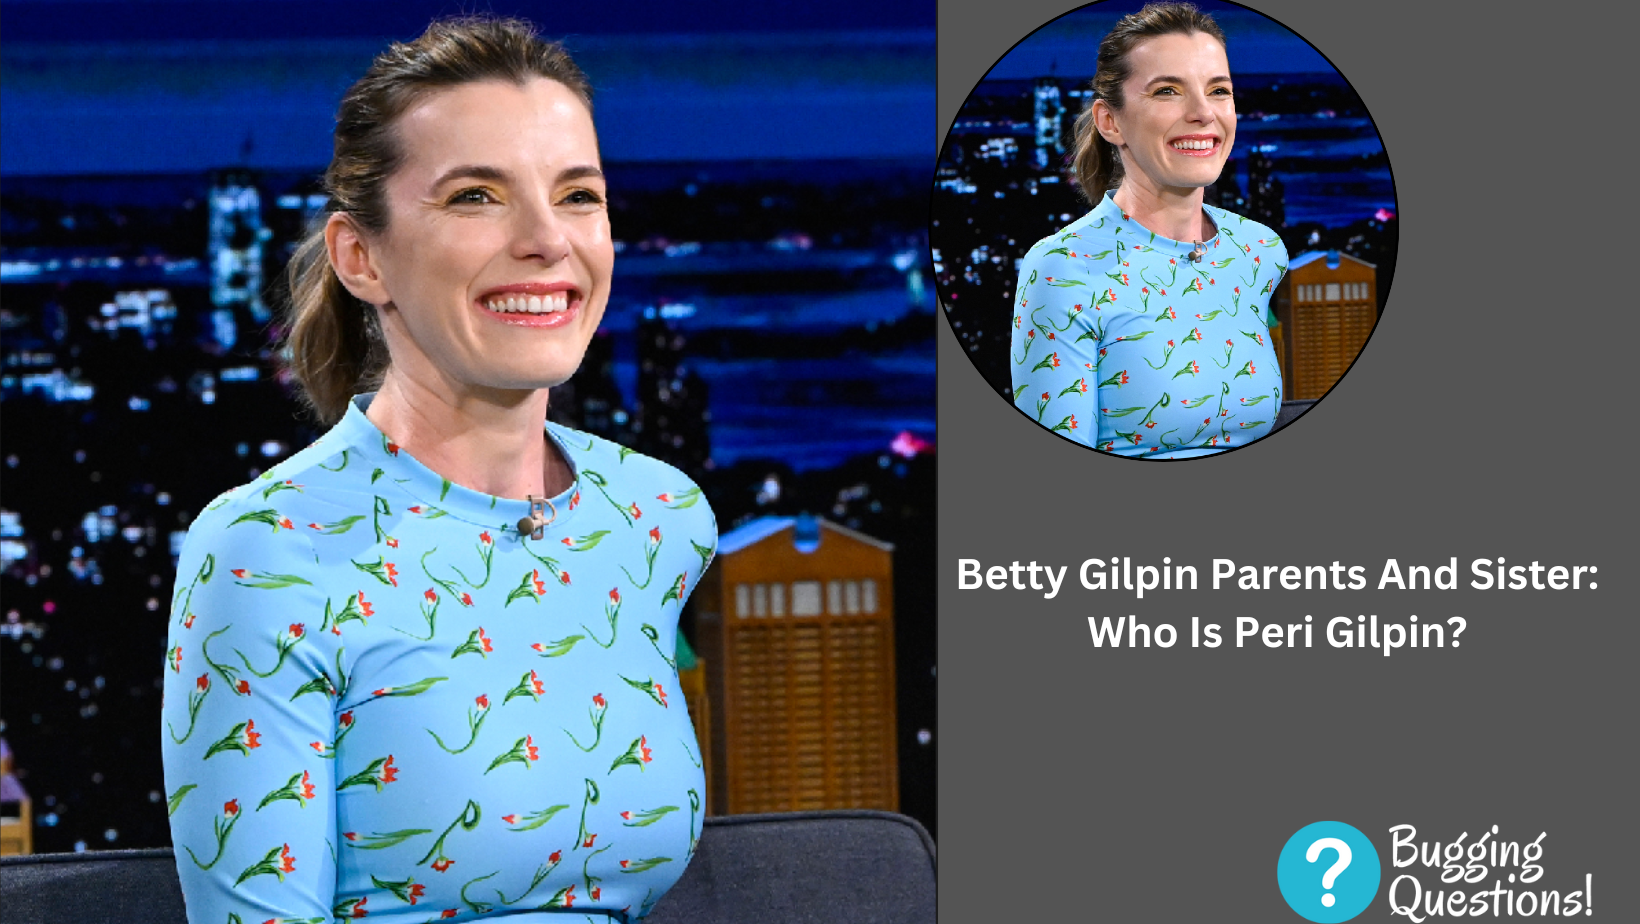 Betty Gilpin Parents And Sister: Who Is Peri Gilpin?